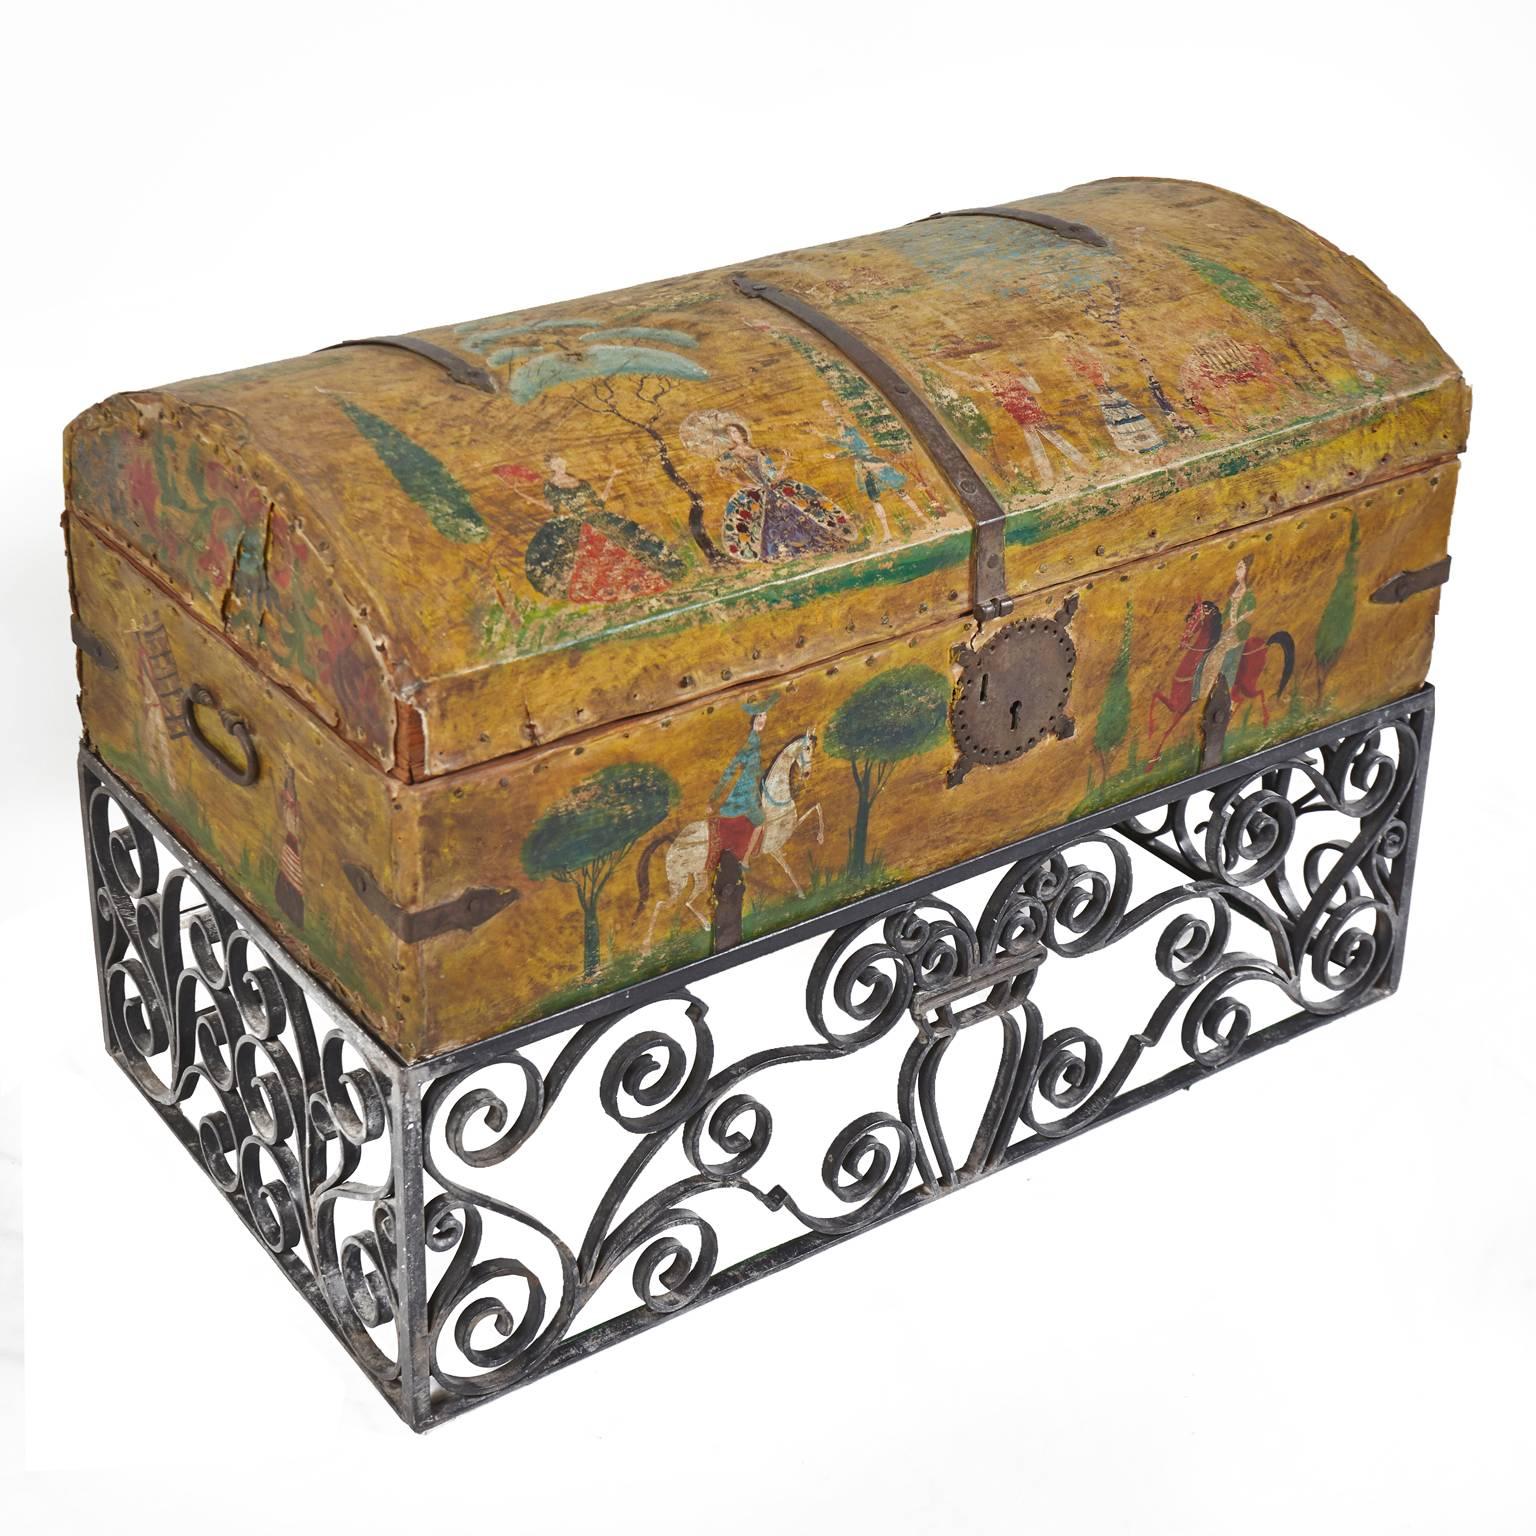 Wonderful weathered hand-painted leather trunk with wrought Iron stand by Mexican Artist Salvador Corona. This trunk was on a ranch in Tucson, AZ.
and was exposed to the elements. The trunk has character and patina. Salvador Corona was born in 1895